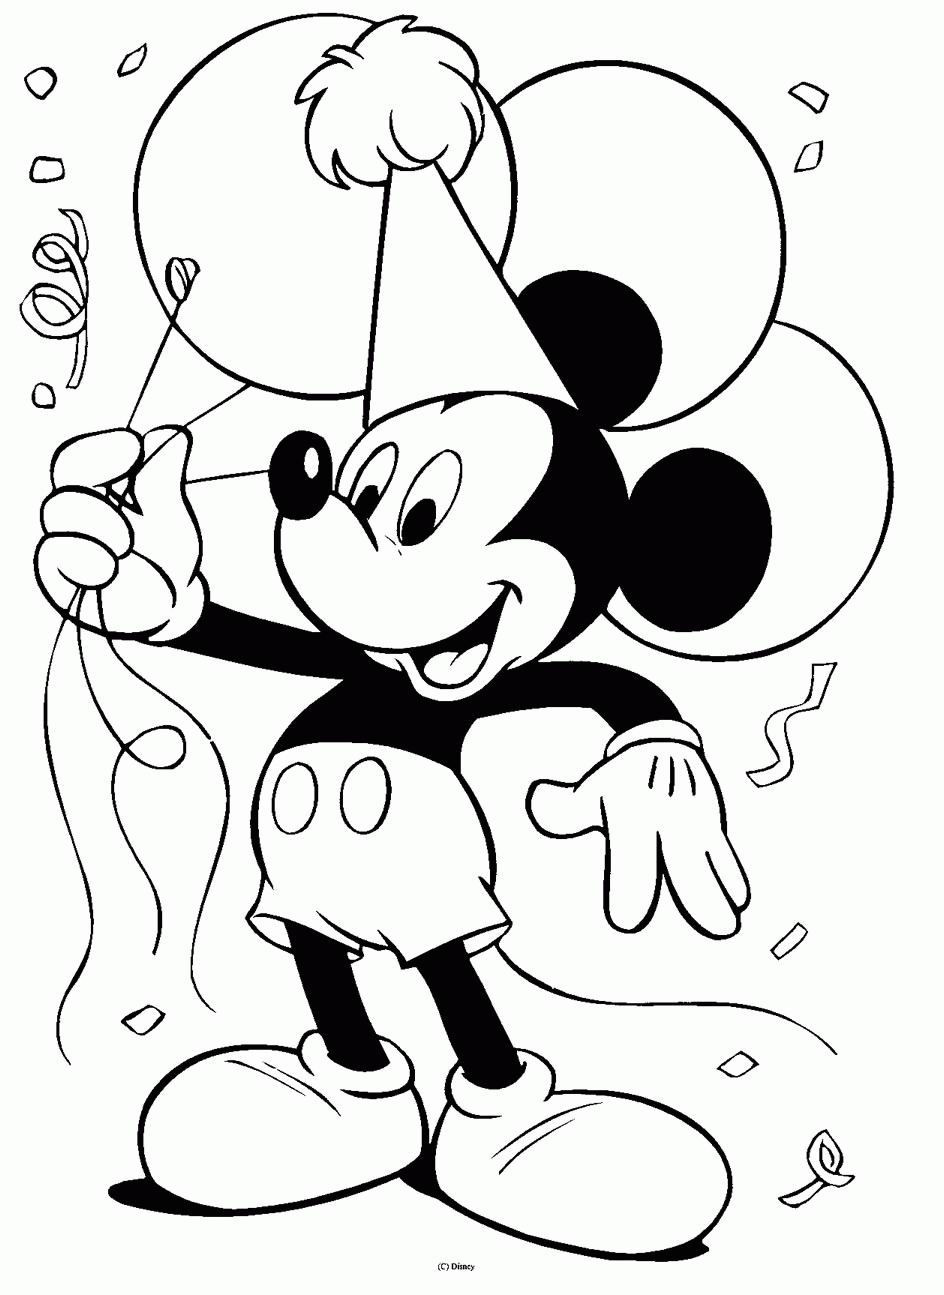 Disney Coloring Books
 Ultimate pictures mix Disney coloring pages